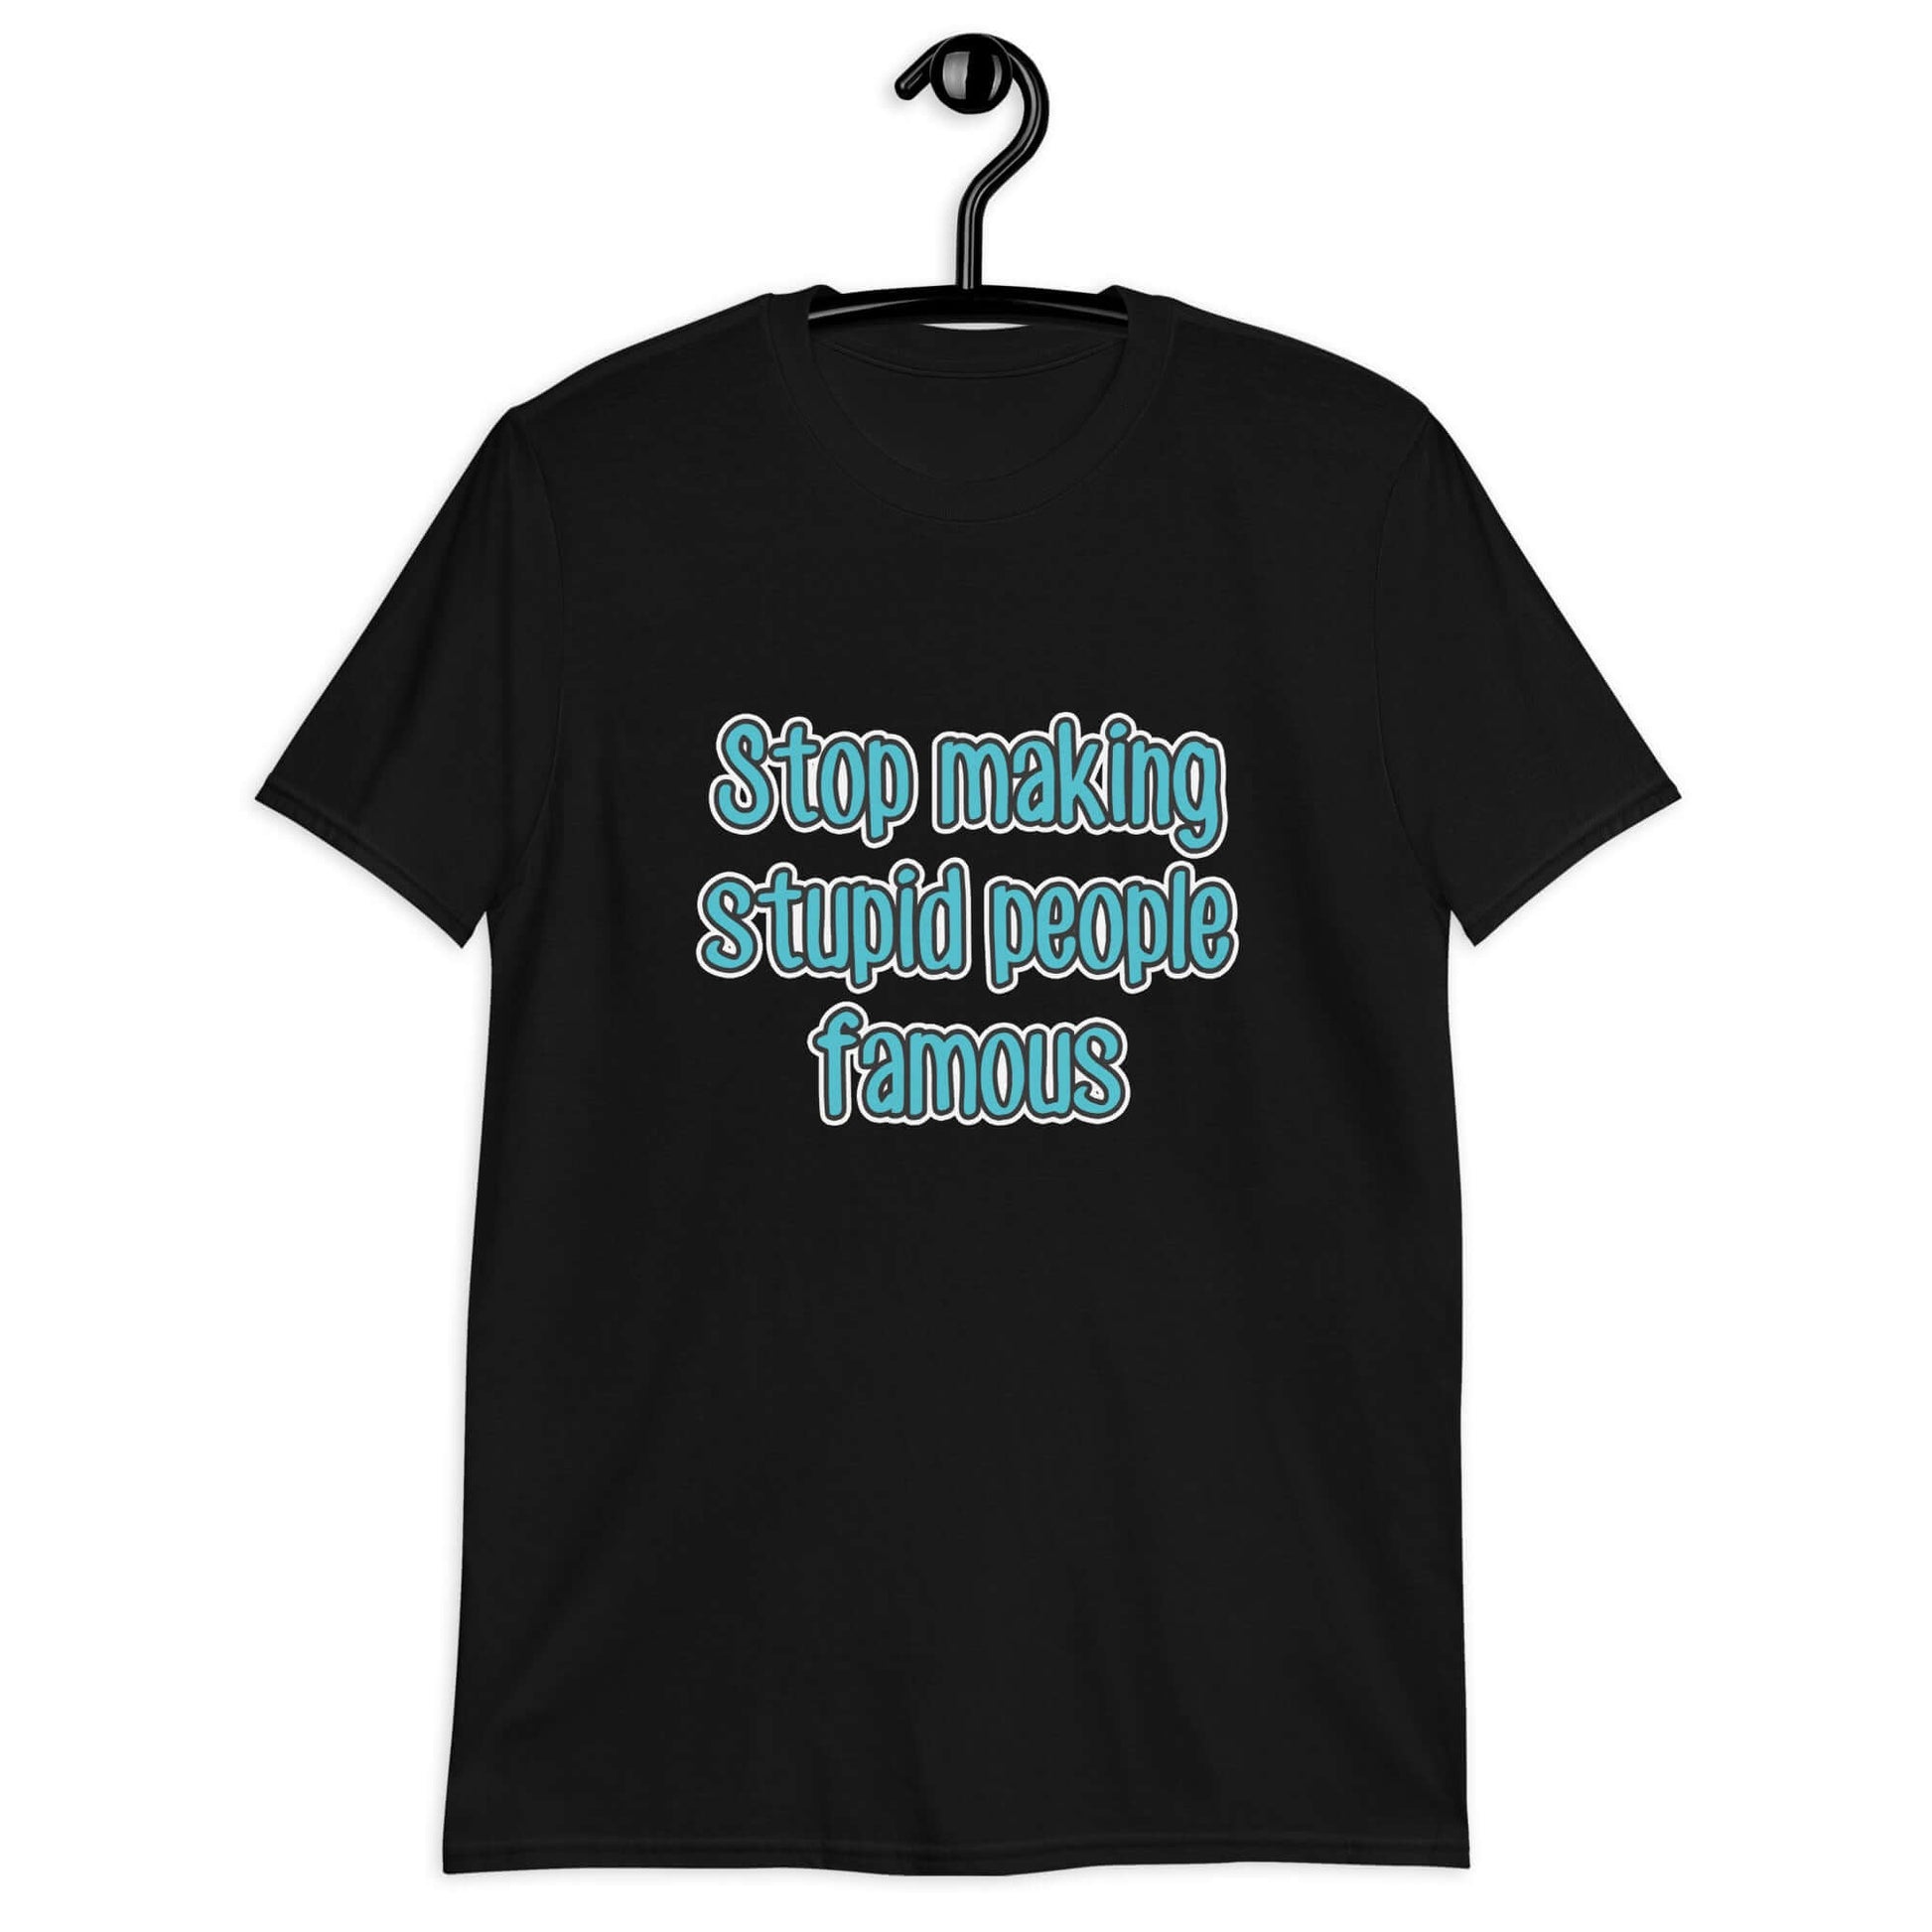 Black t-shirt with the phrase Stop making stupid people famous printed on the front. The text is turquoise. 